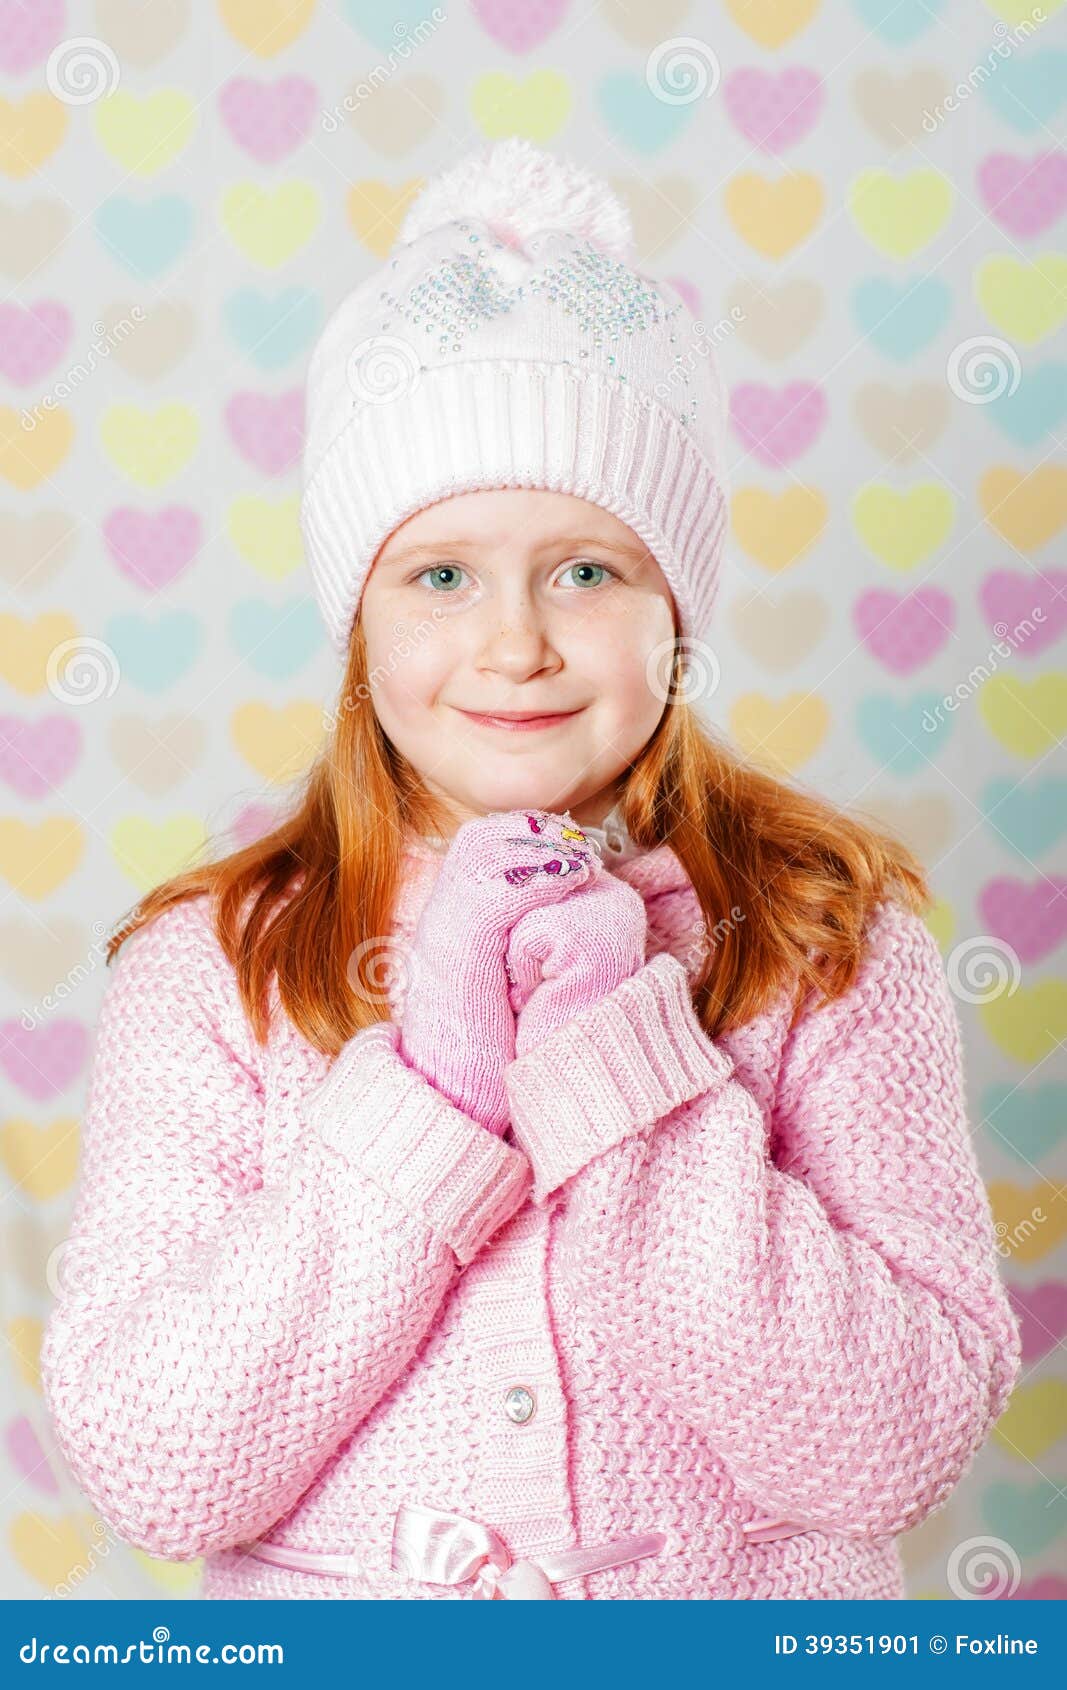 Little Girl in a Pink Hat and a Sweater Stock Image - Image of hand ...